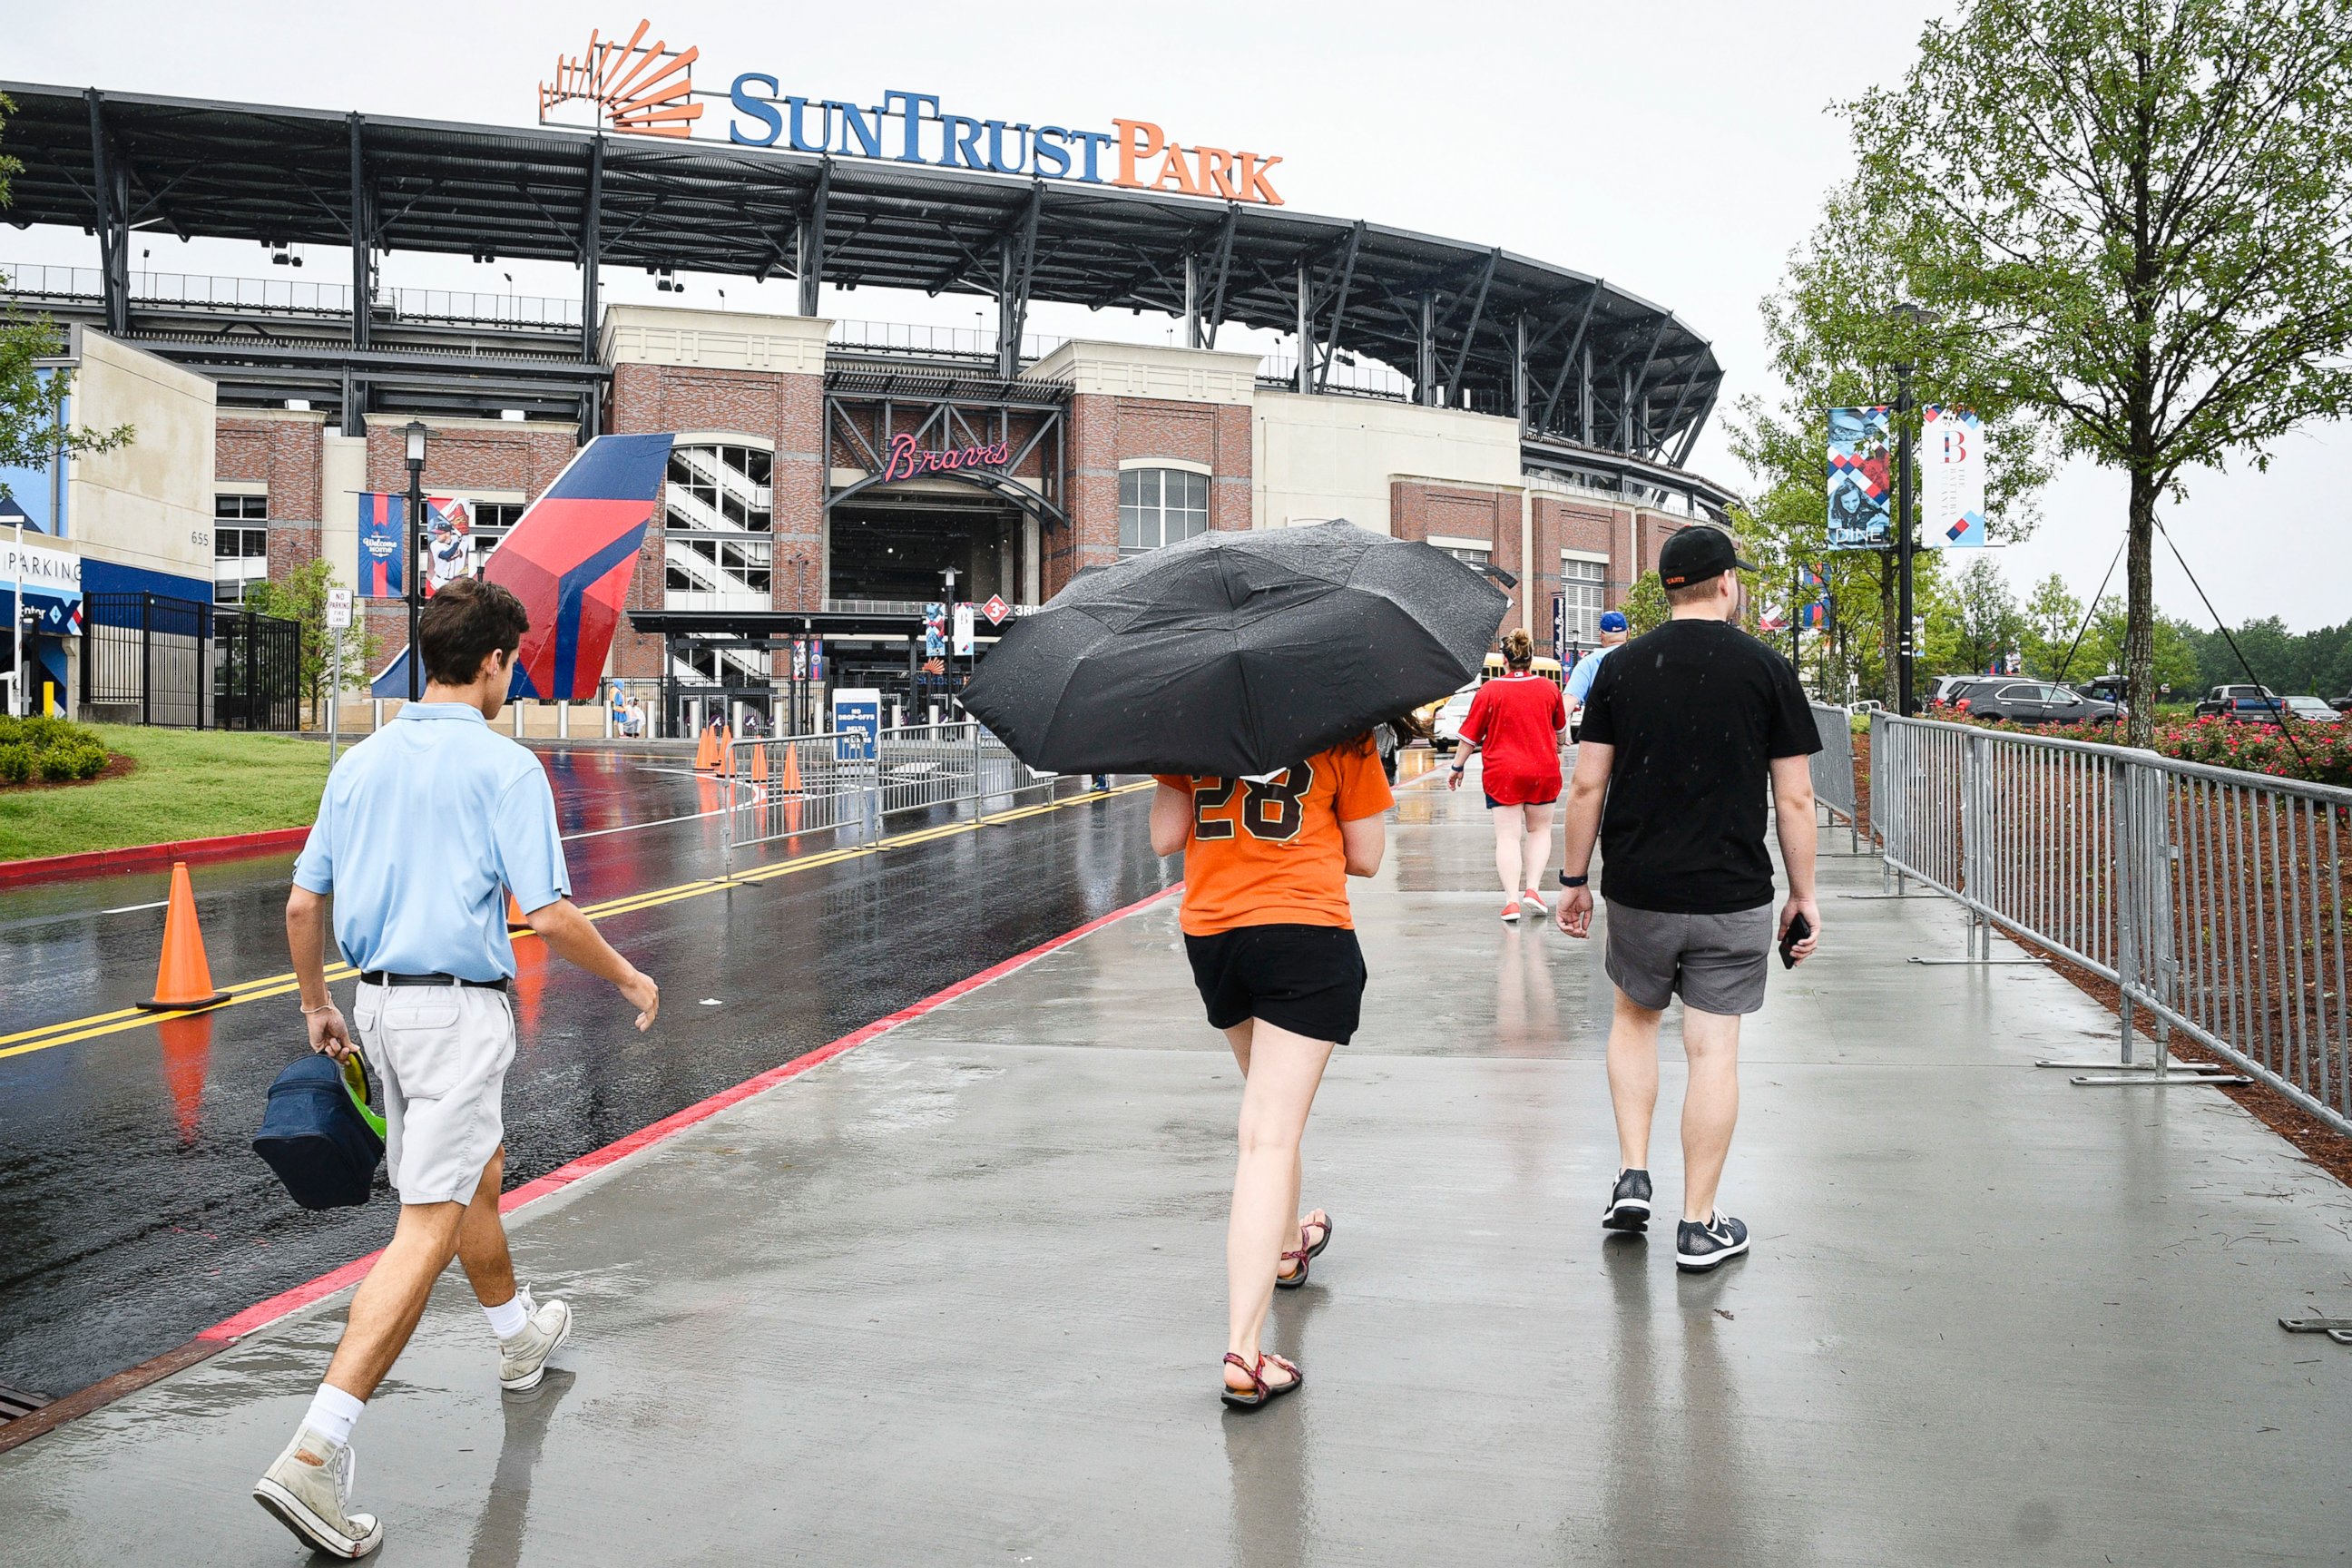 PHOTO: Fans arrive at SunTrust Park for a baseball game, June 20, 2017, in Atlanta. Tropical Storm Cindy has been causing rain in much of the Southeast.